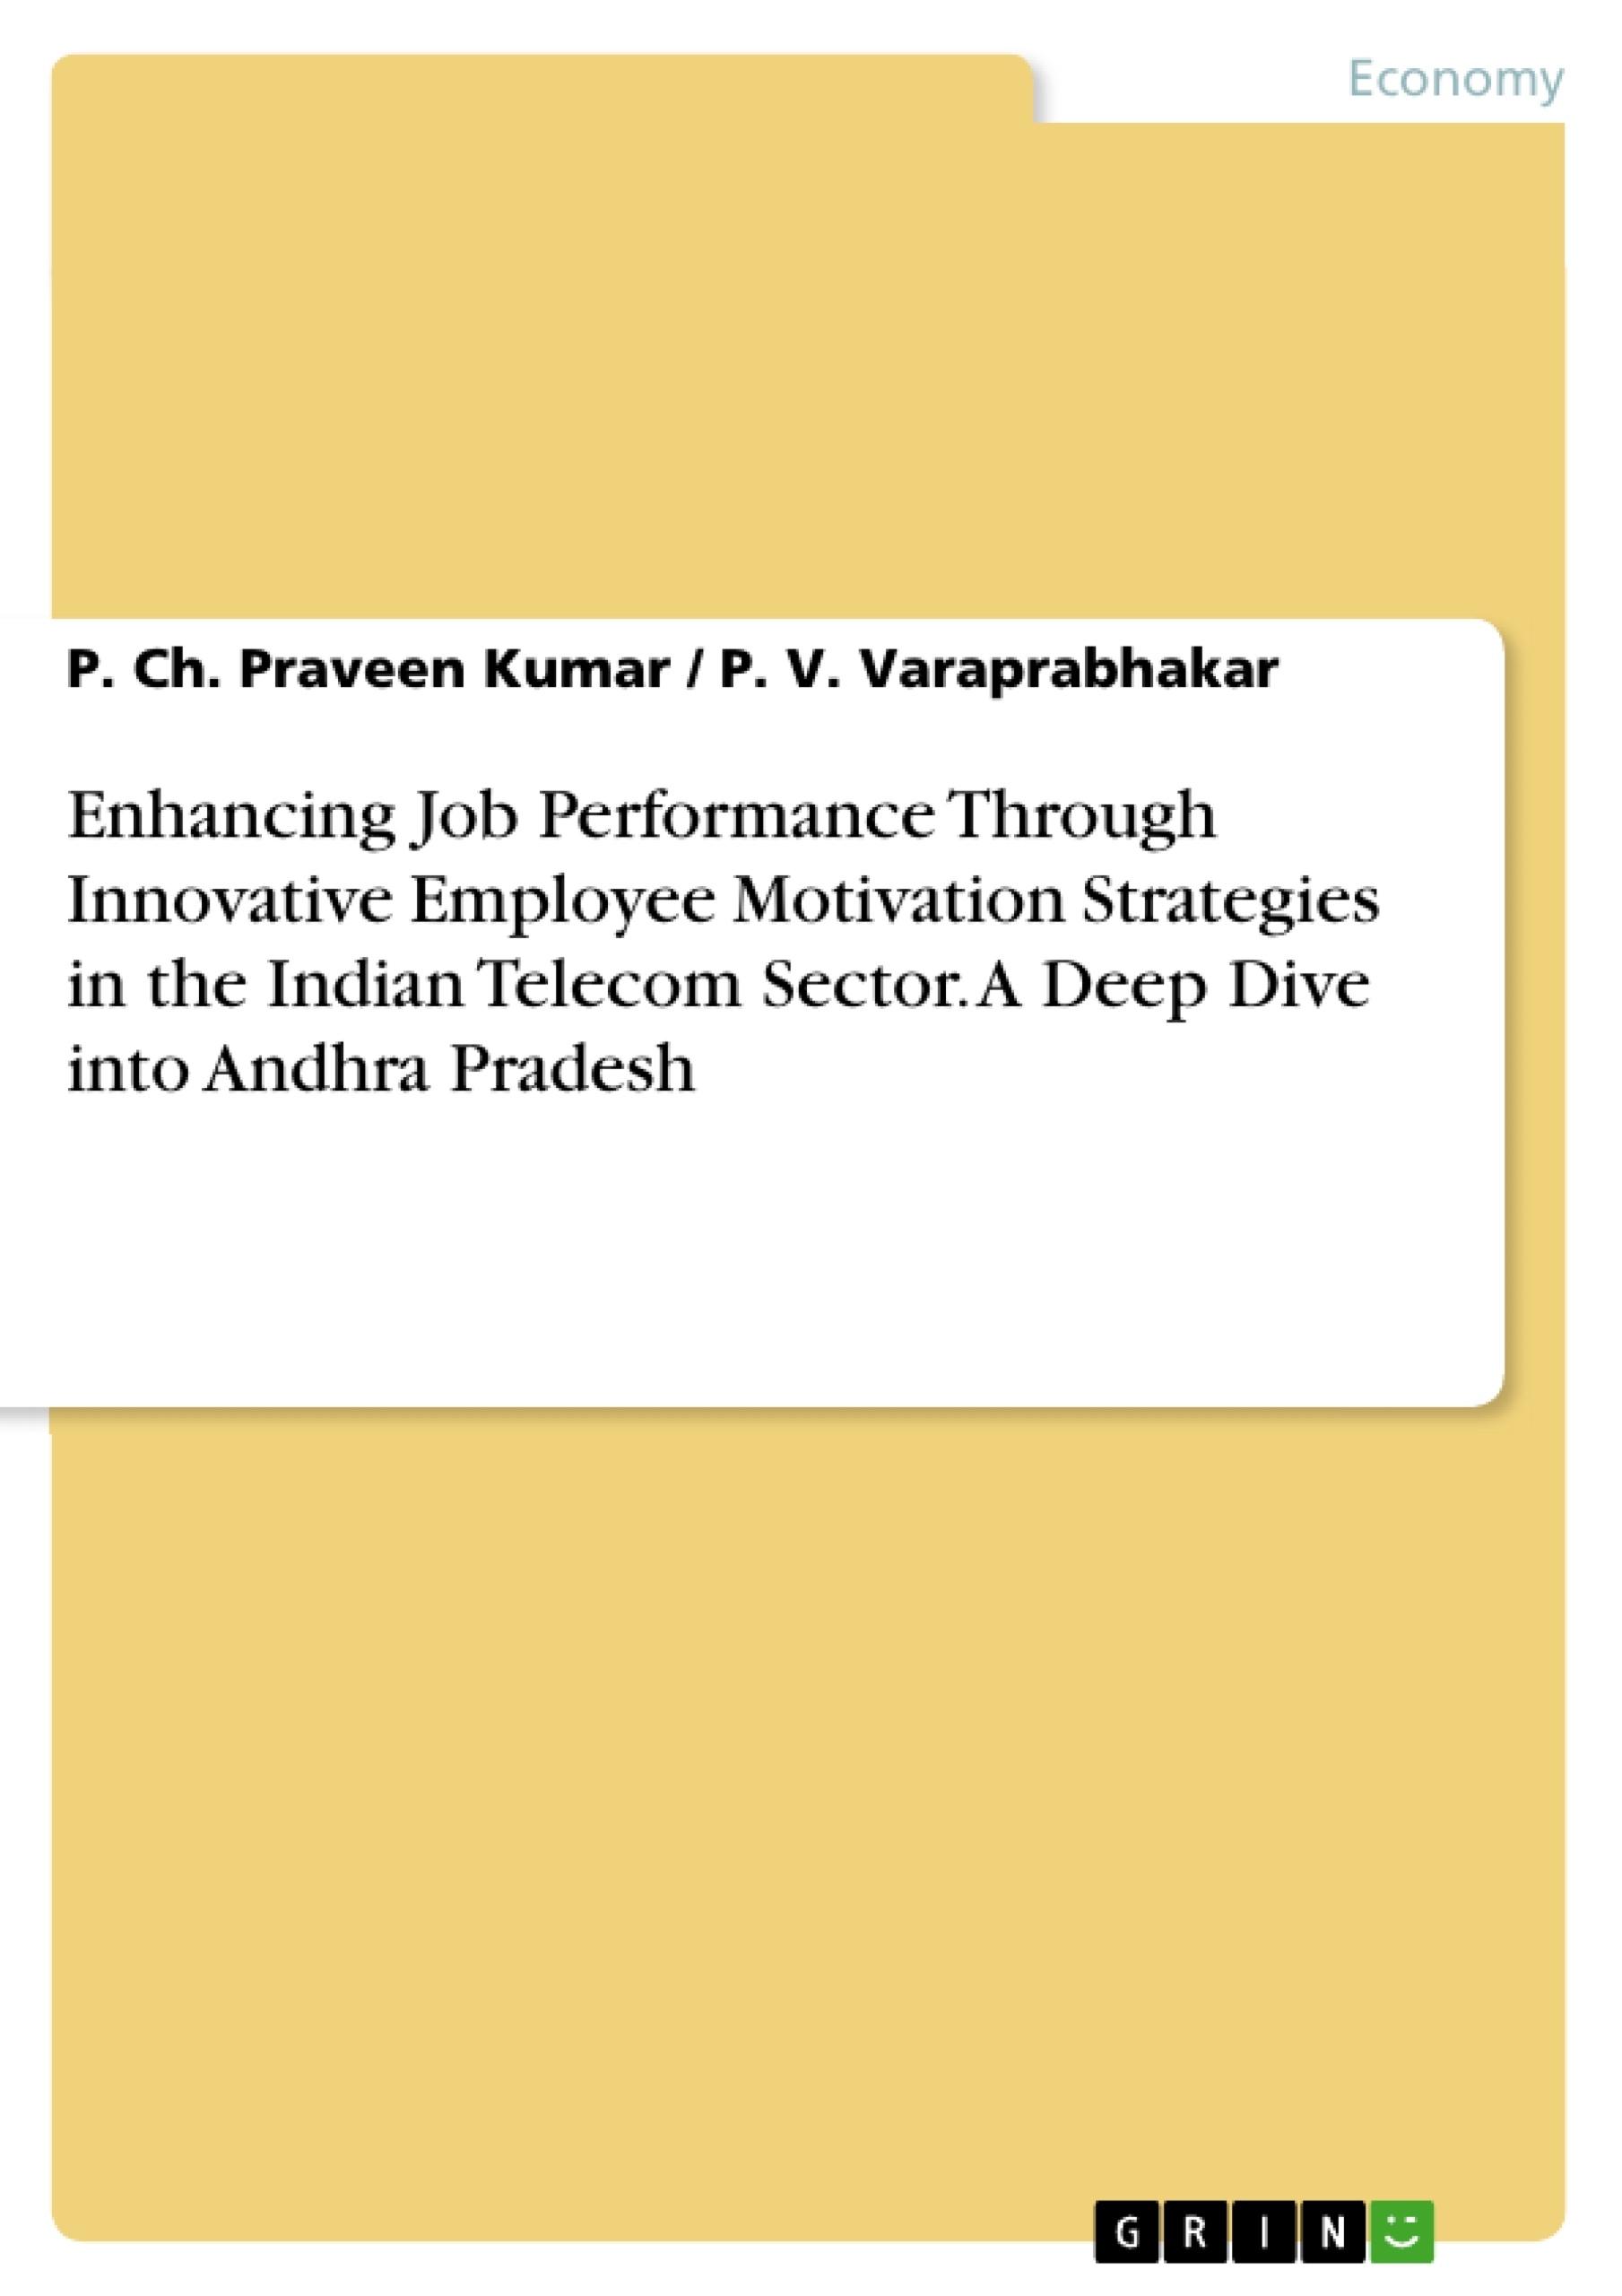 Title: Enhancing Job Performance Through Innovative Employee Motivation Strategies in the Indian Telecom Sector. A Deep Dive into Andhra Pradesh